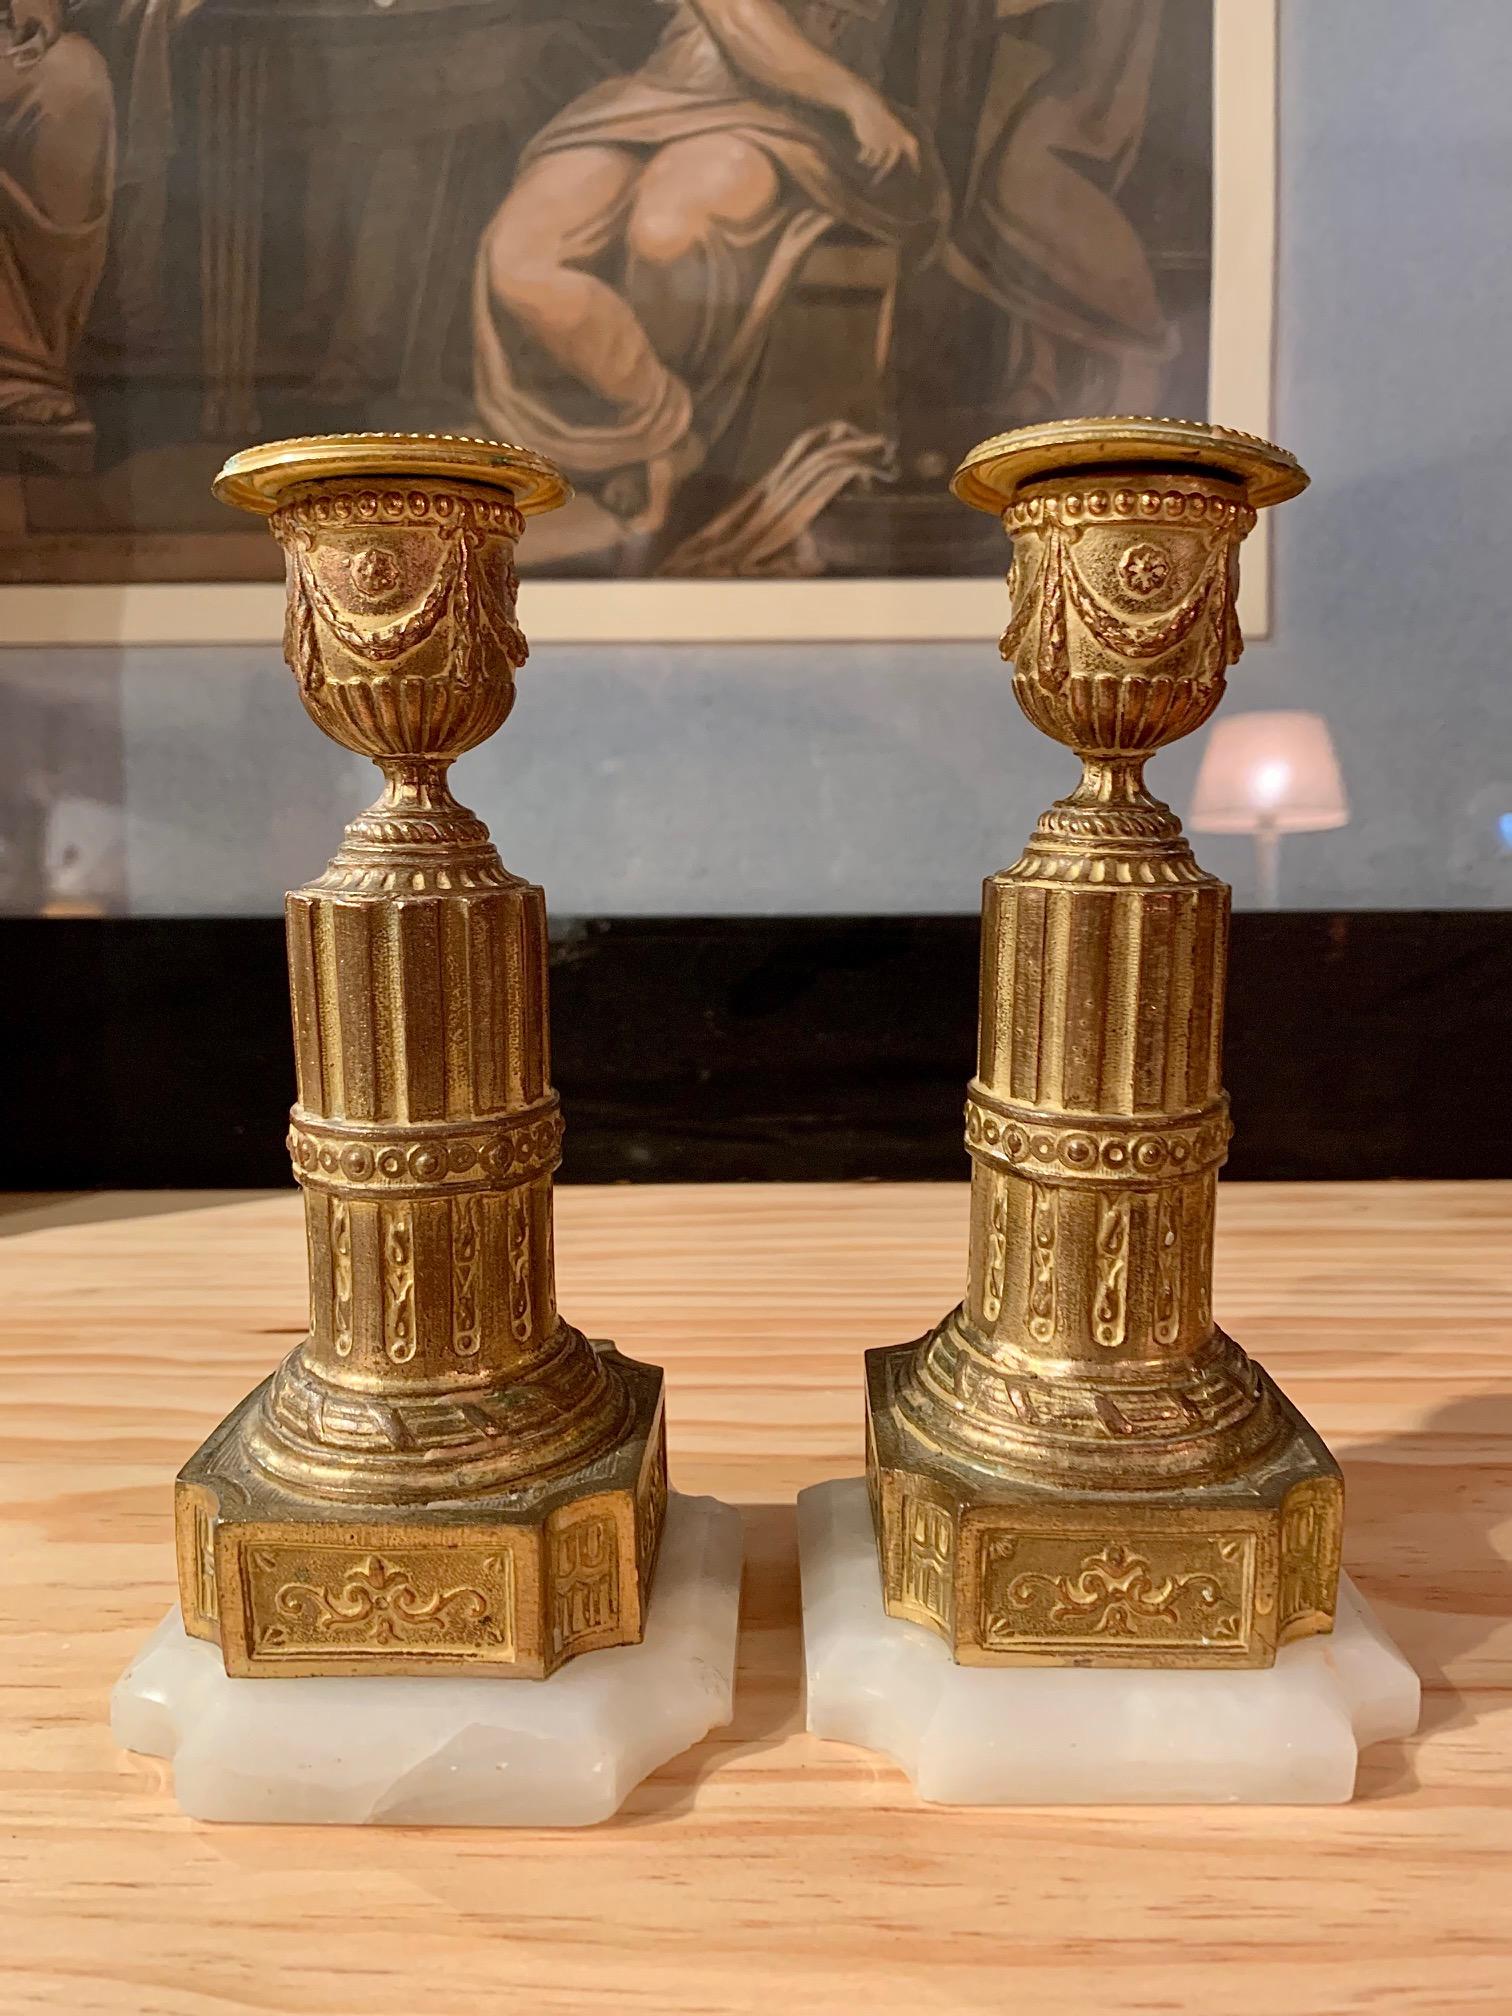 A pair of Louis XVI style candlesticks, in gilt metal in the central part of the column that rests on an alabaster base.